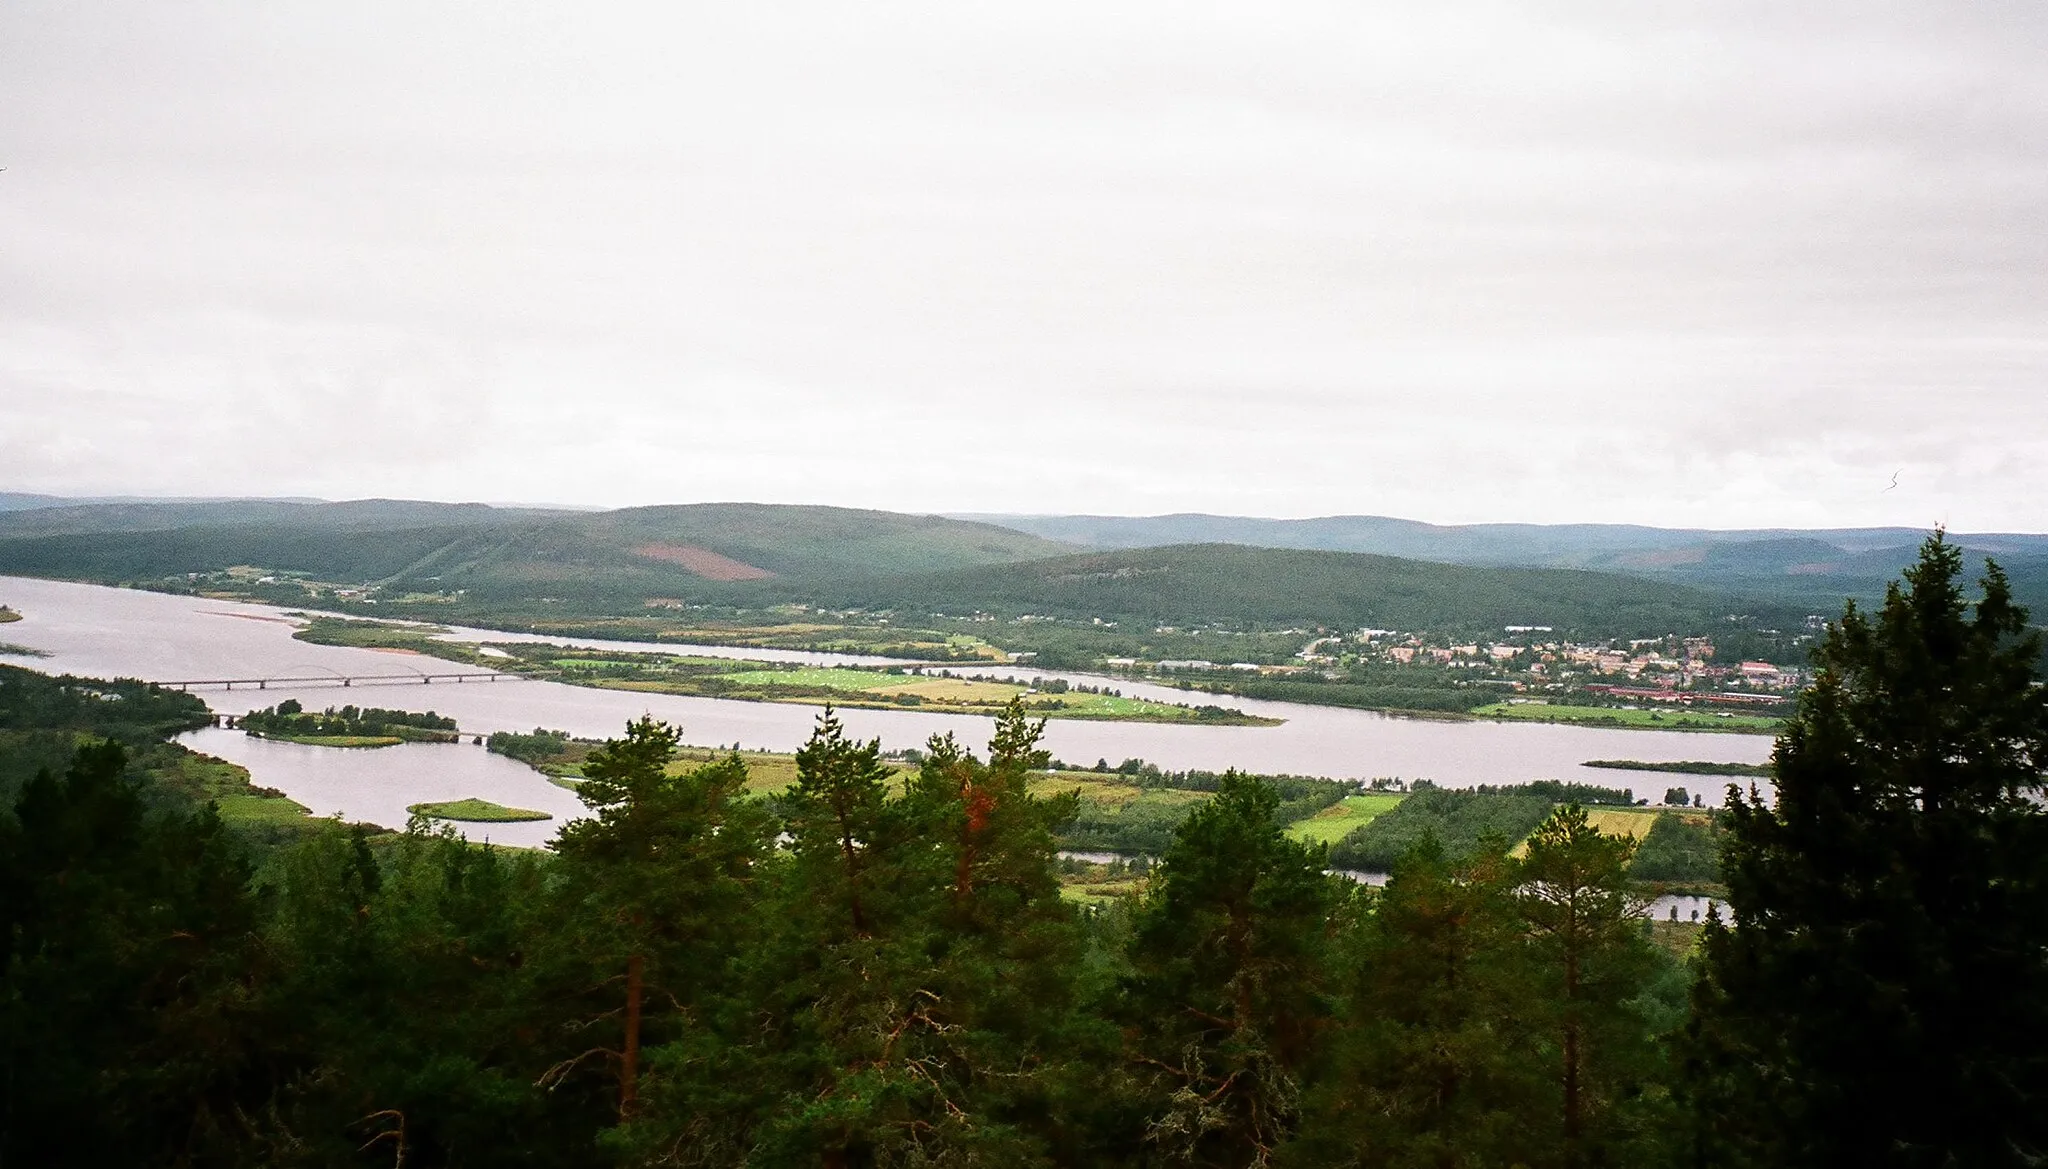 Photo showing: View to the west from the observation tower atop Aavasaksa hill in finnish Lapland. The wide Tornio river is flowing towards the left of the picture. The big village visible is Övertorneå-Matarengi in Sweden. On the far left the bridge marks one of the border points between Sweden and Finland.